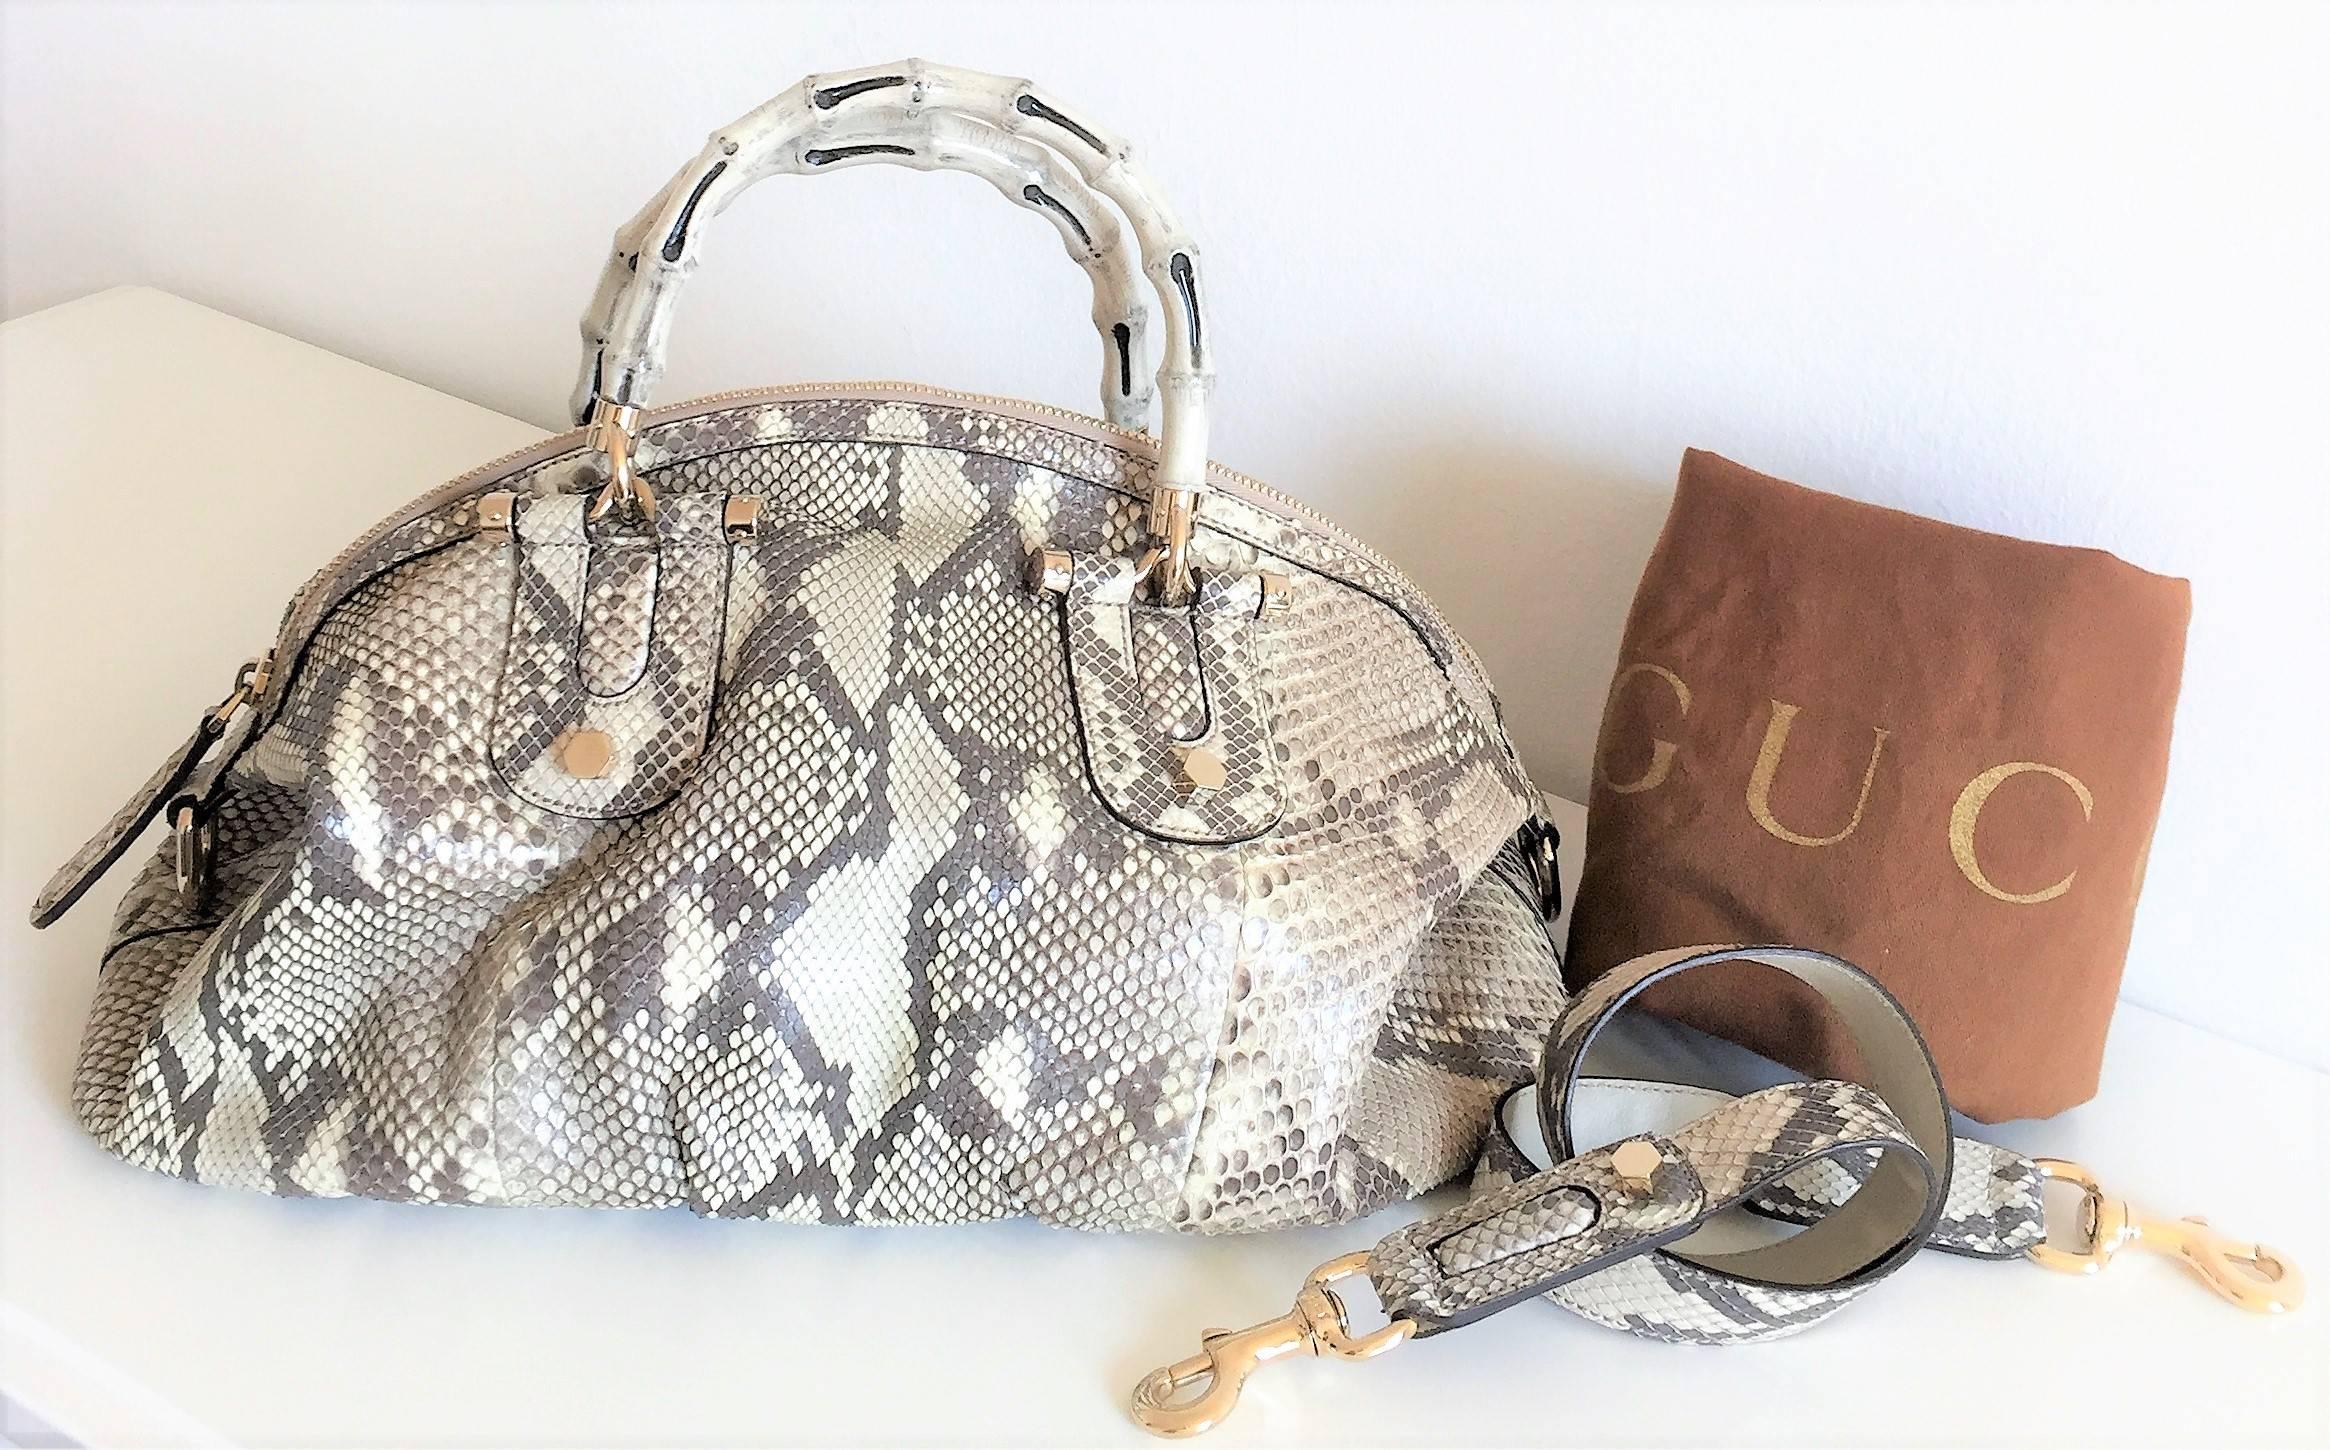 This magnificent Gucci Python Bamboo Bag is in pristine condition, comes with its original shoulder strap and dust bag.

Colour: Beige/white/grey.
Material: Python Leather.
Hardware: Golden.
Dimensions: (aprox) in. W 15.7 x H 9 x D 5.1  [cm. 40 x 23